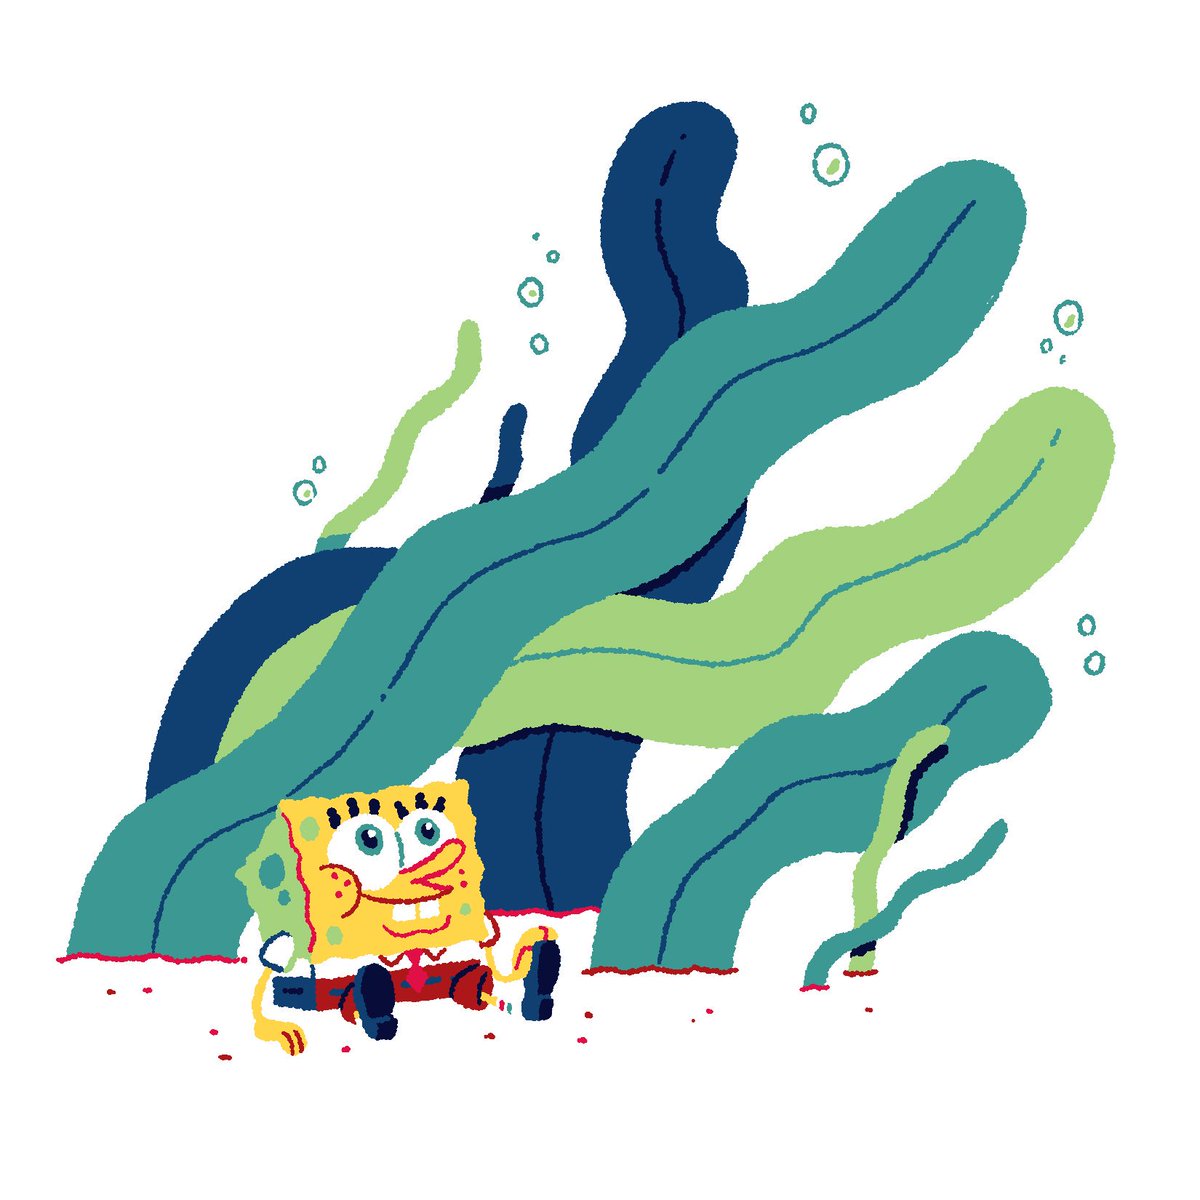 Happy 20 years to SpongeBob SquarePants. This special cartoon has consistently entertained and inspired me to this very day.